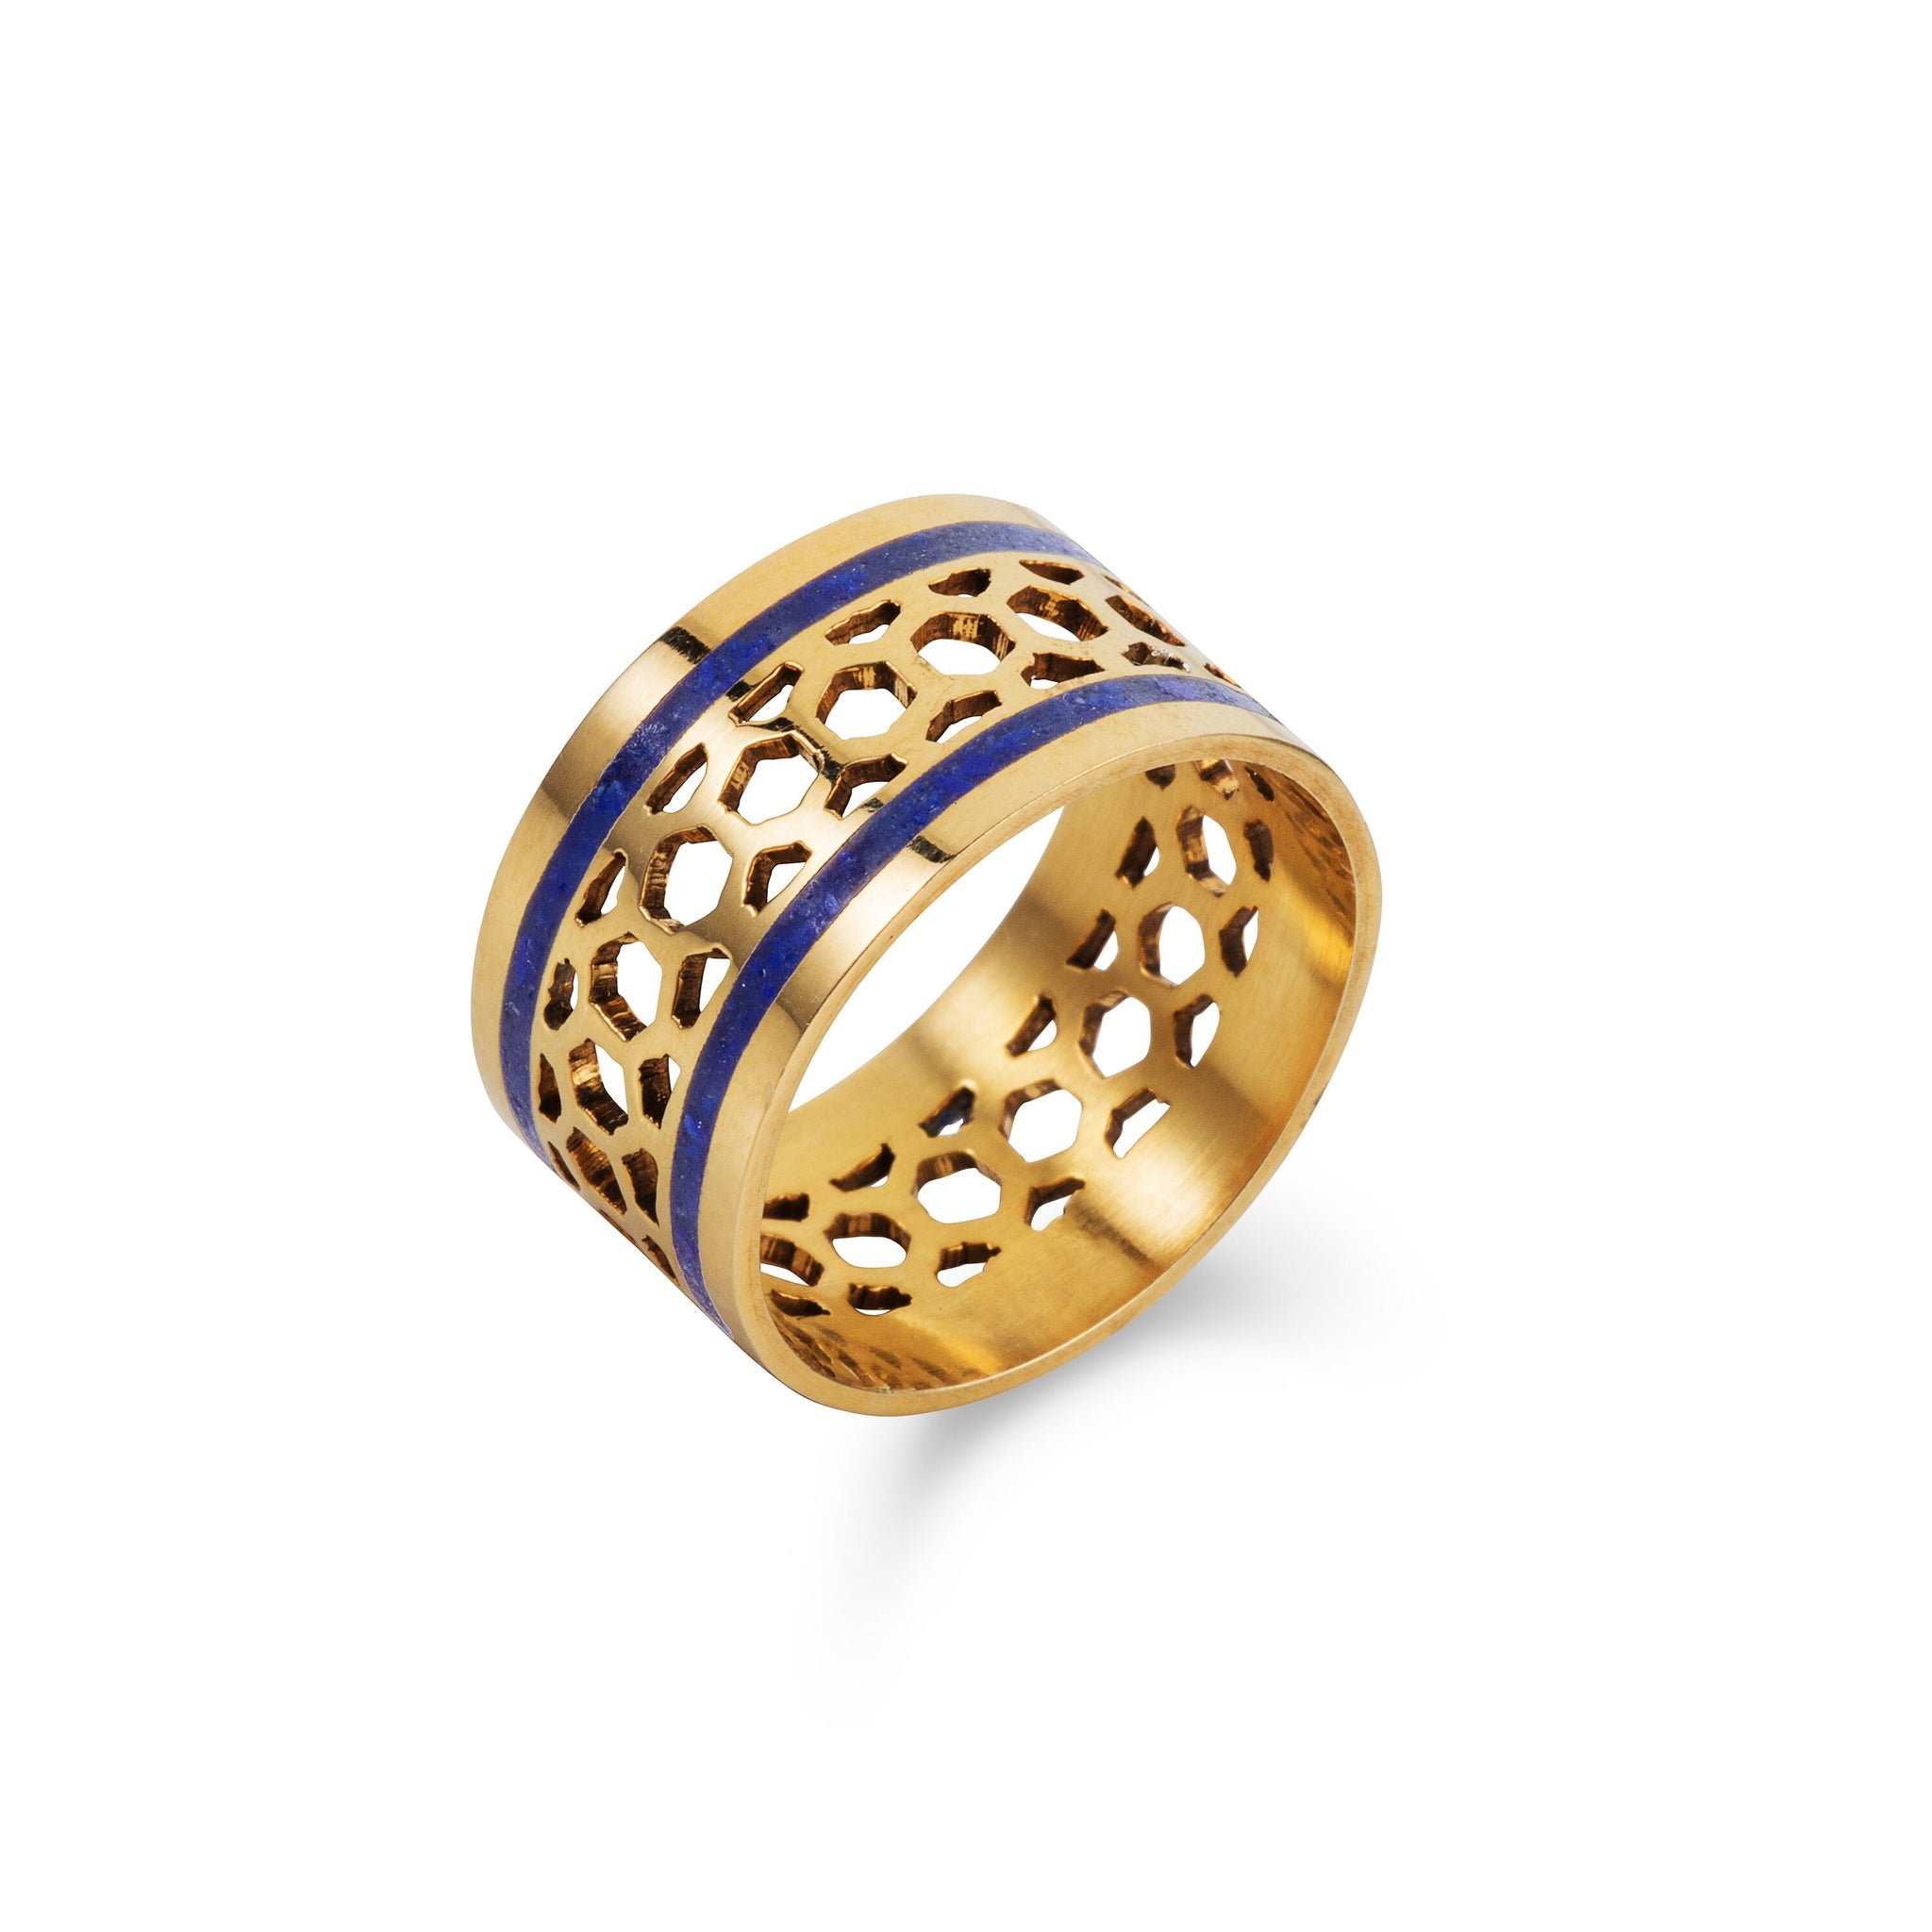 Handmade Afghan Ring Blue Gemstone Lapis Lazuli Gold Plated Lattice Elegant Inspired Jewelry Boho Chic Accessories Gift for Her